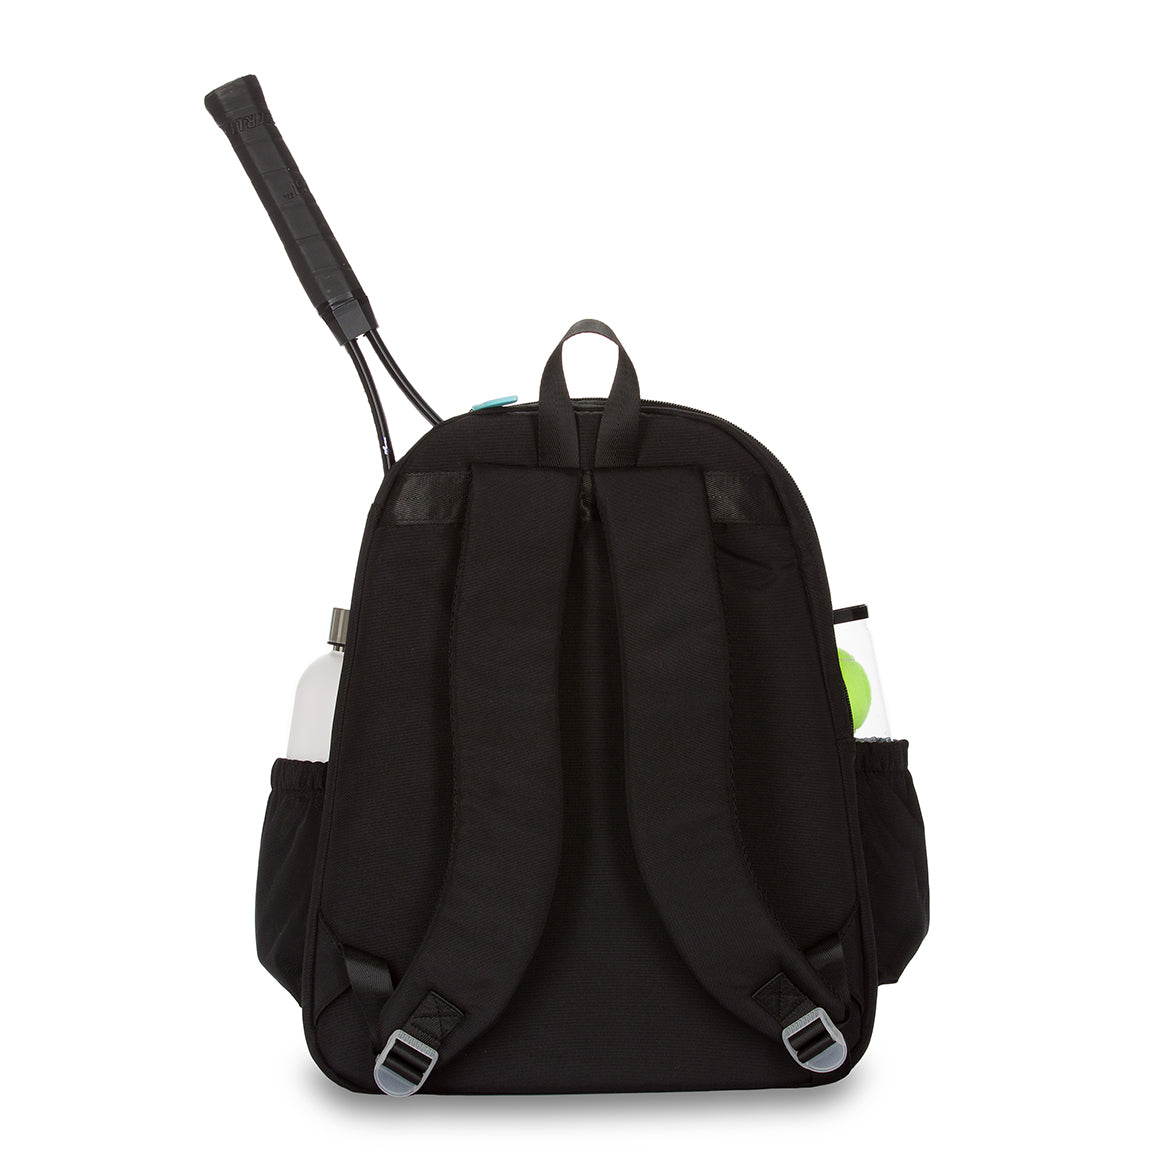 Back view of black courtside tennis backpack with tennis racquet inside interior pocket.